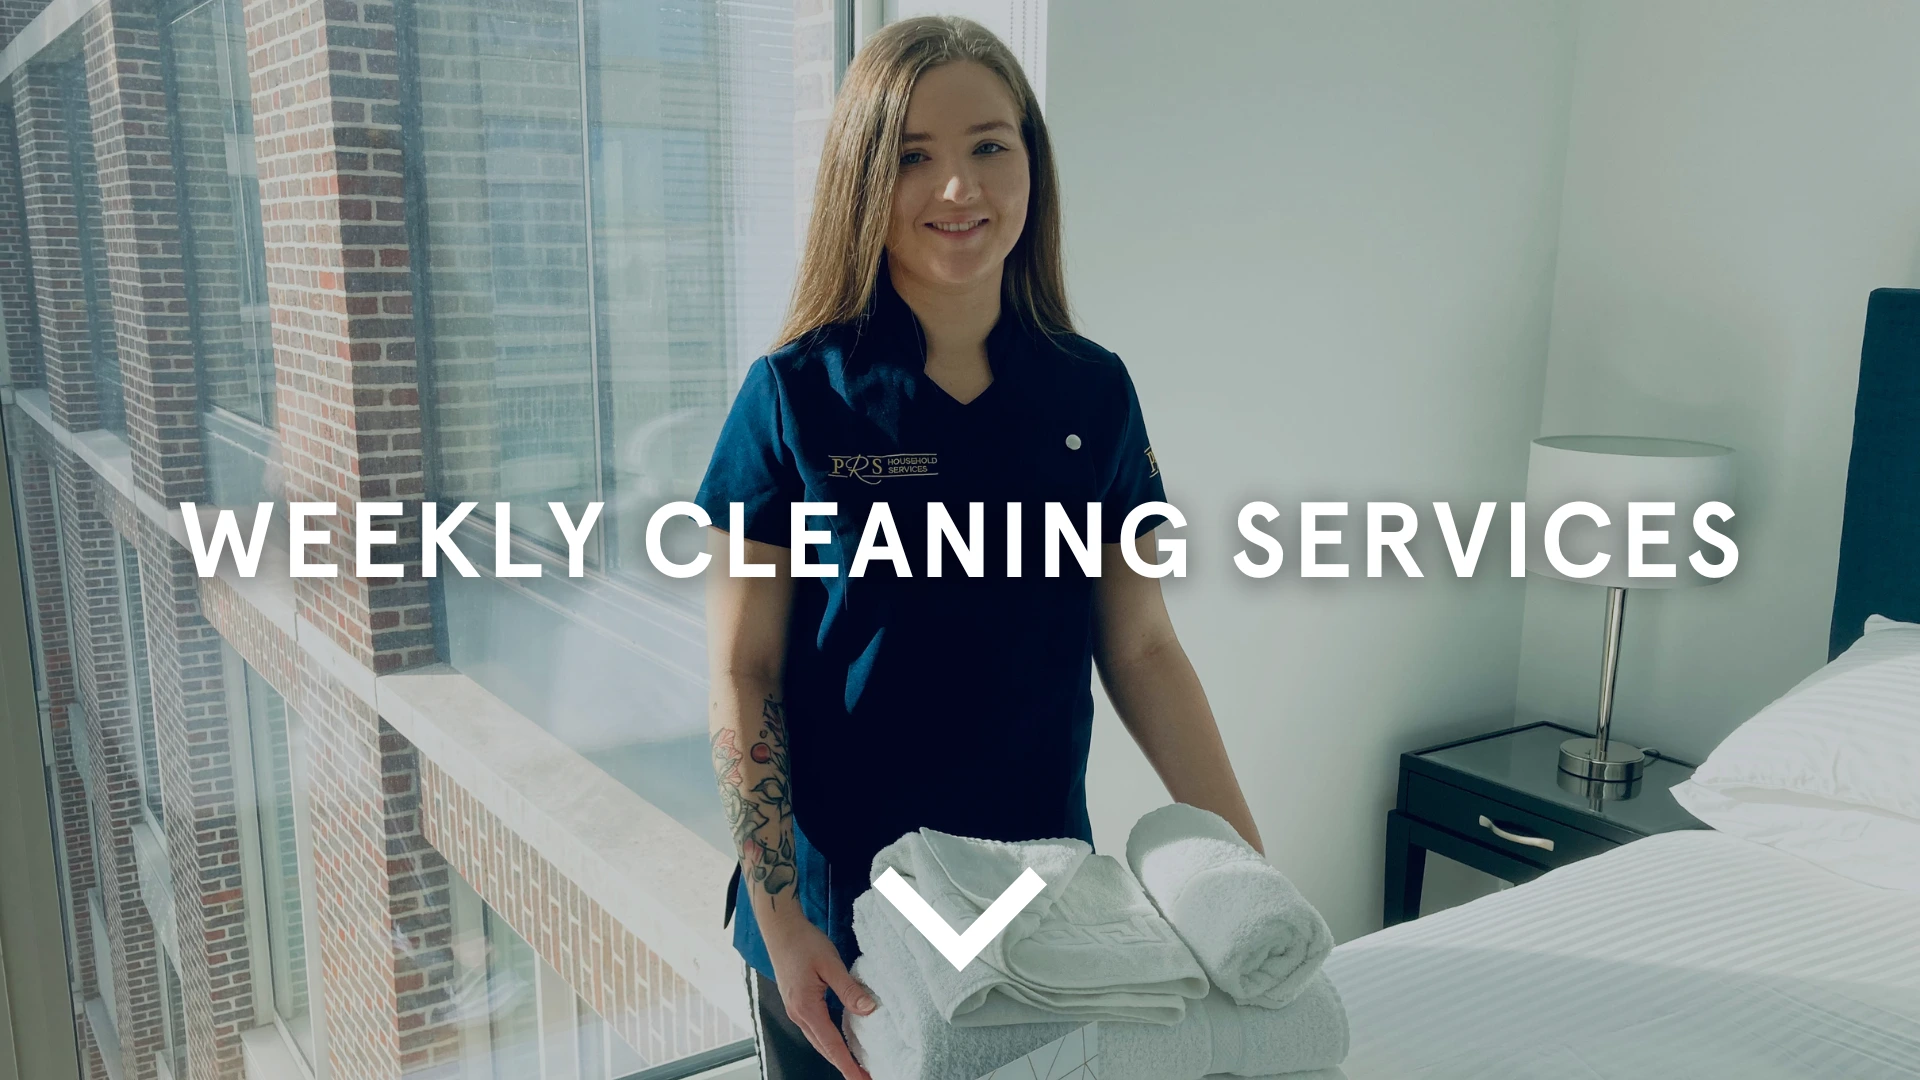 Weekly Cleaning Services Dublin Towels & Linens